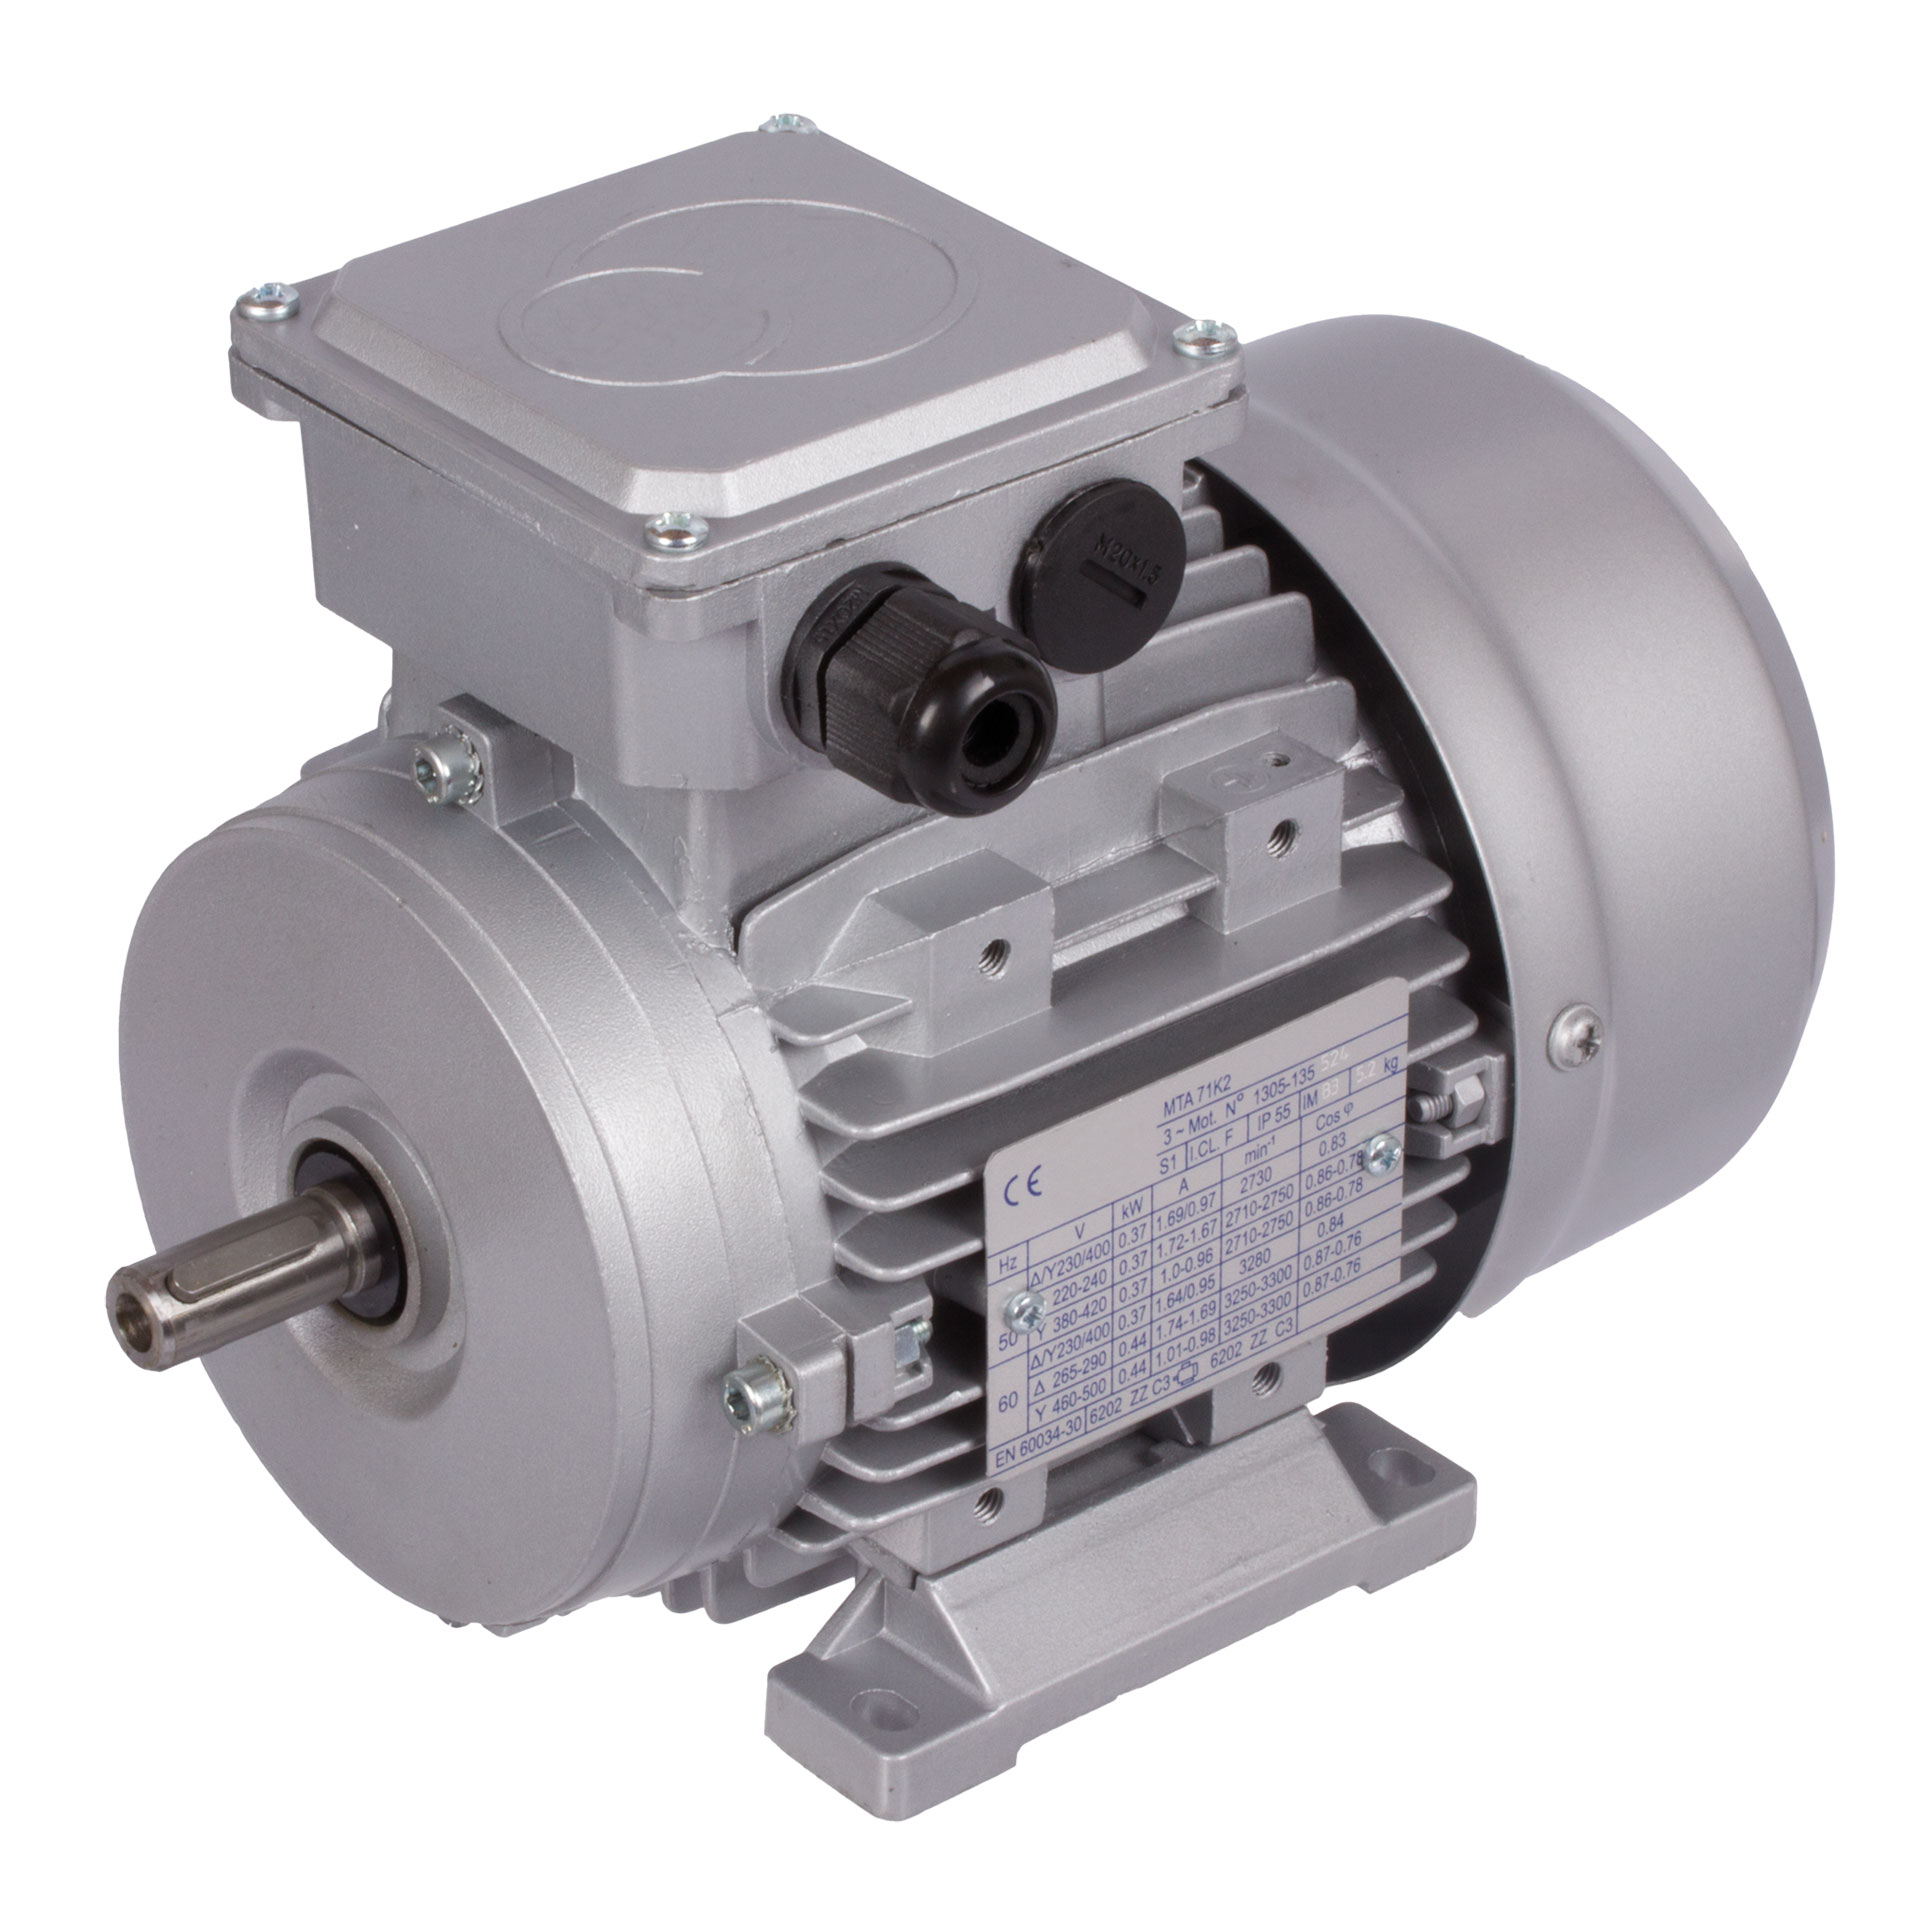 Standard three phase motor SM/I 230/400V 50Hz 4.0kW ca. 1450 rpm size 112  M-T model B3 efficiency class IE3 (For operating instructions please visit  the download area of our website www.maedler.de) SKU